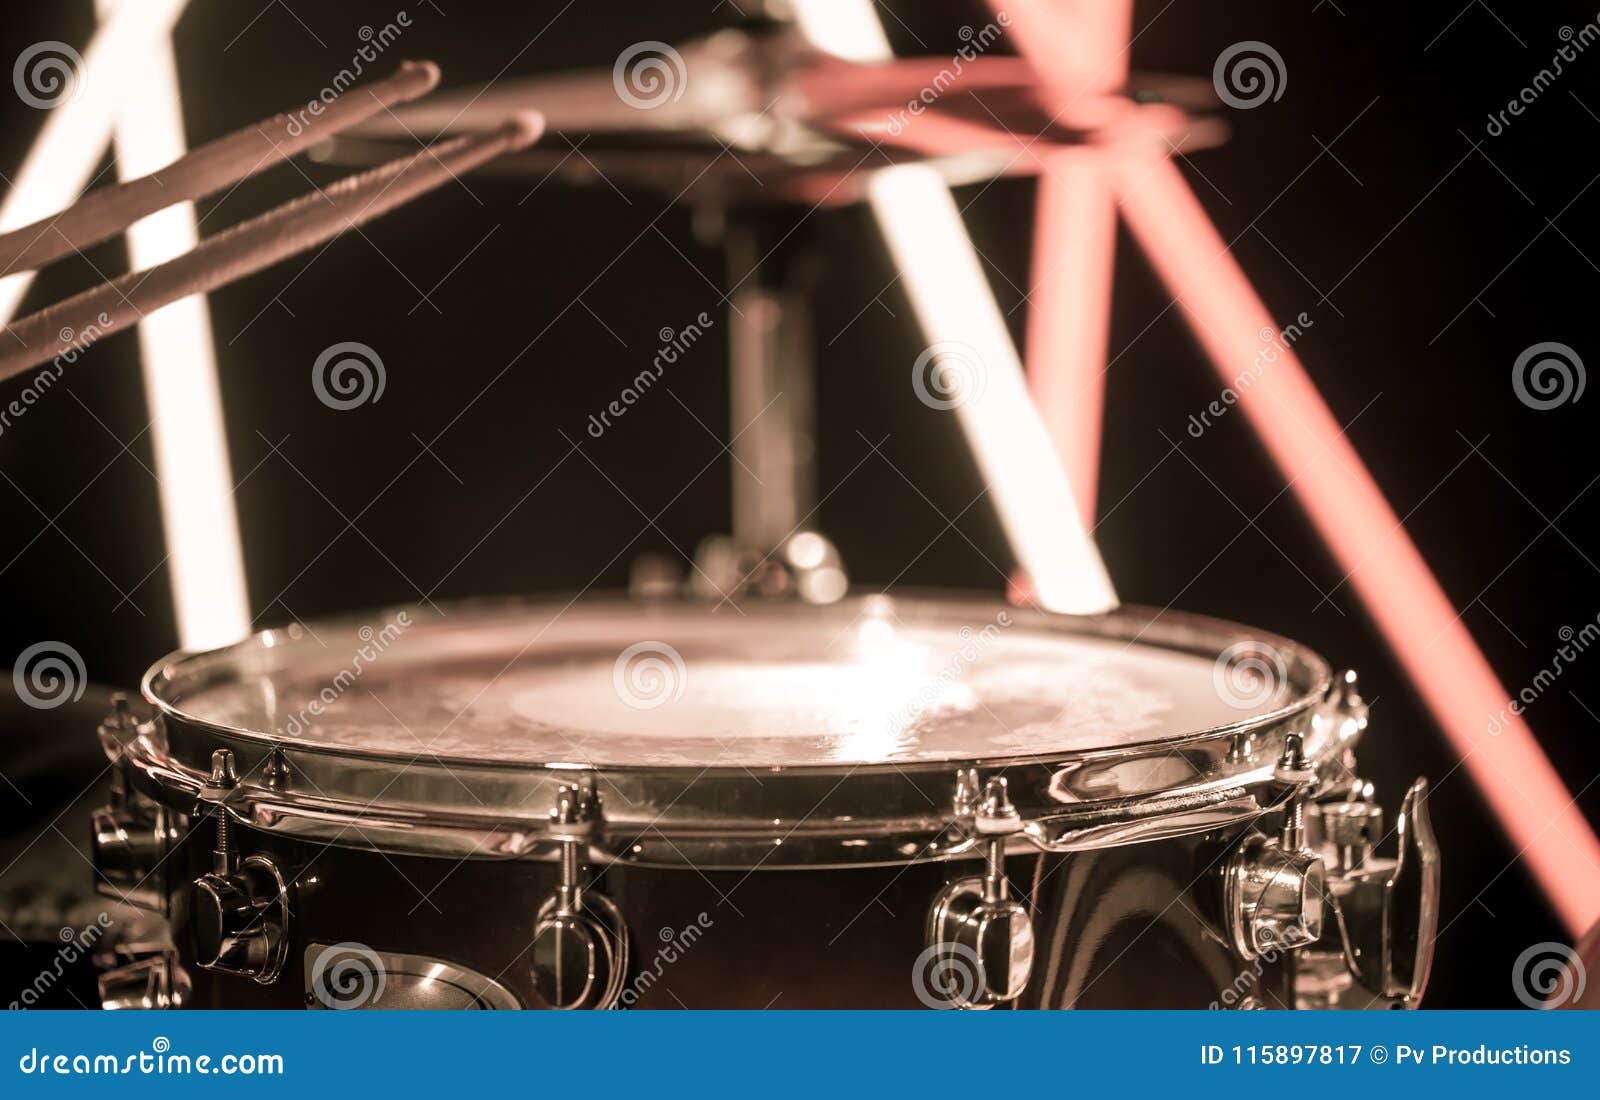 a man plays with sticks on a musical percussion instrument, close-up. on a blurred background of colored lights.